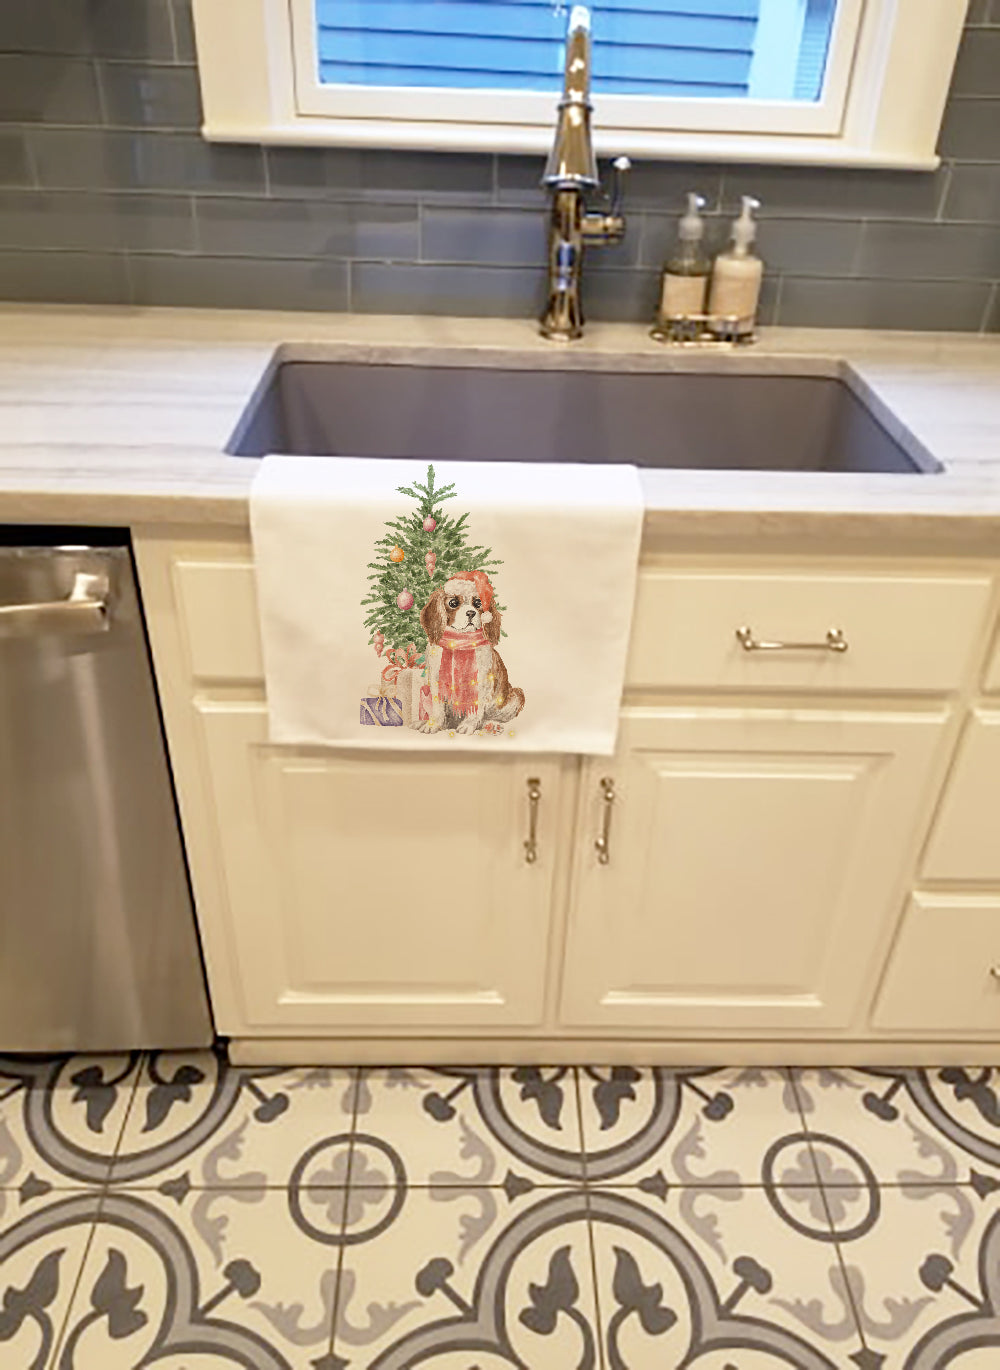 Buy this Cavalier Spaniel Tricolor Blenheim Puppy Christmas Presents and Tree White Kitchen Towel Set of 2